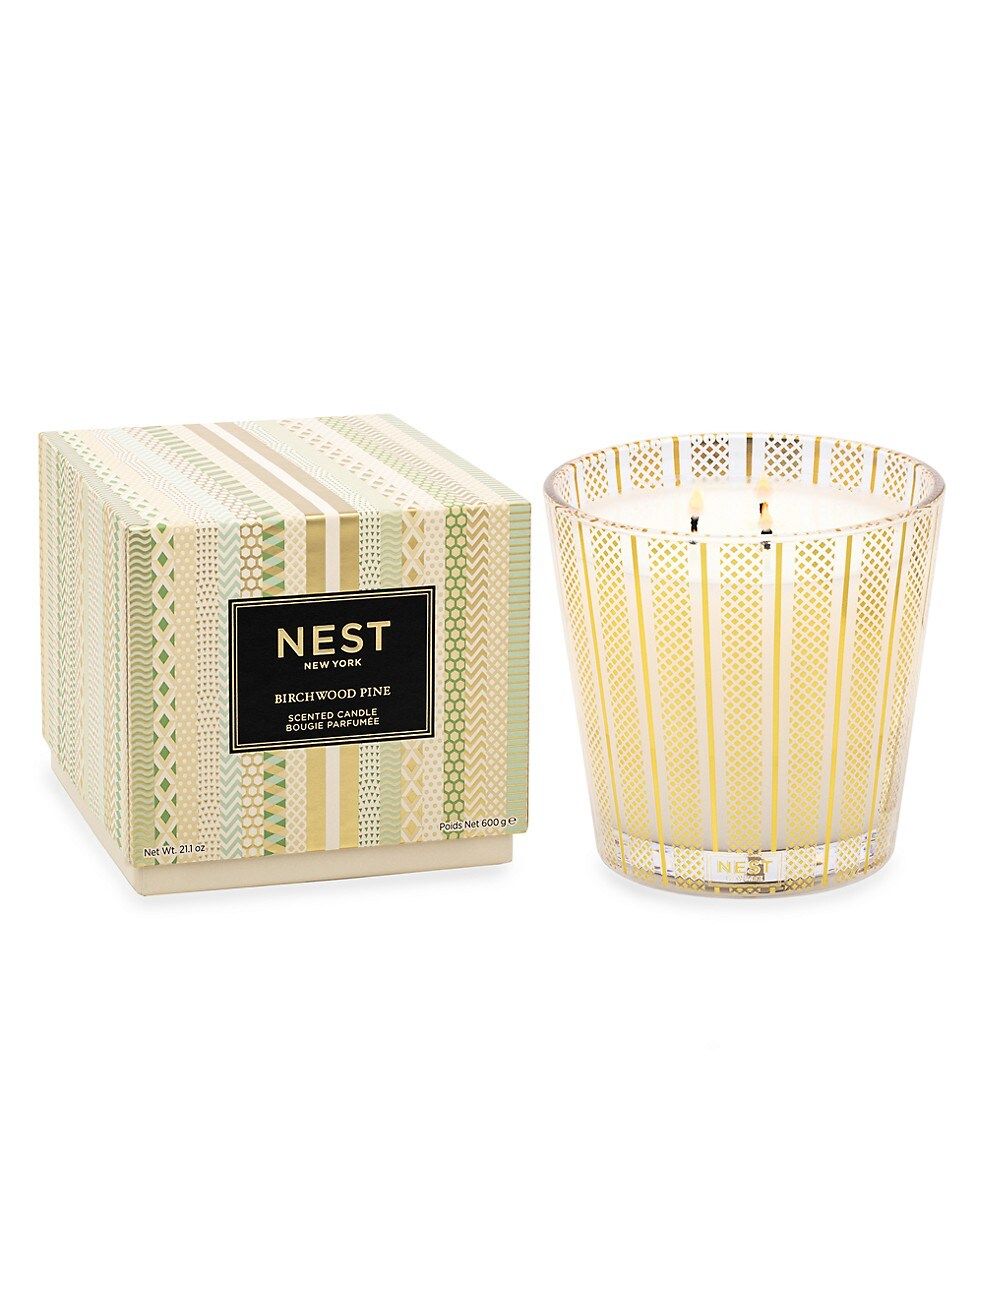 NEST New York Birchwood Pine 3-Wick Scented Candle | Saks Fifth Avenue